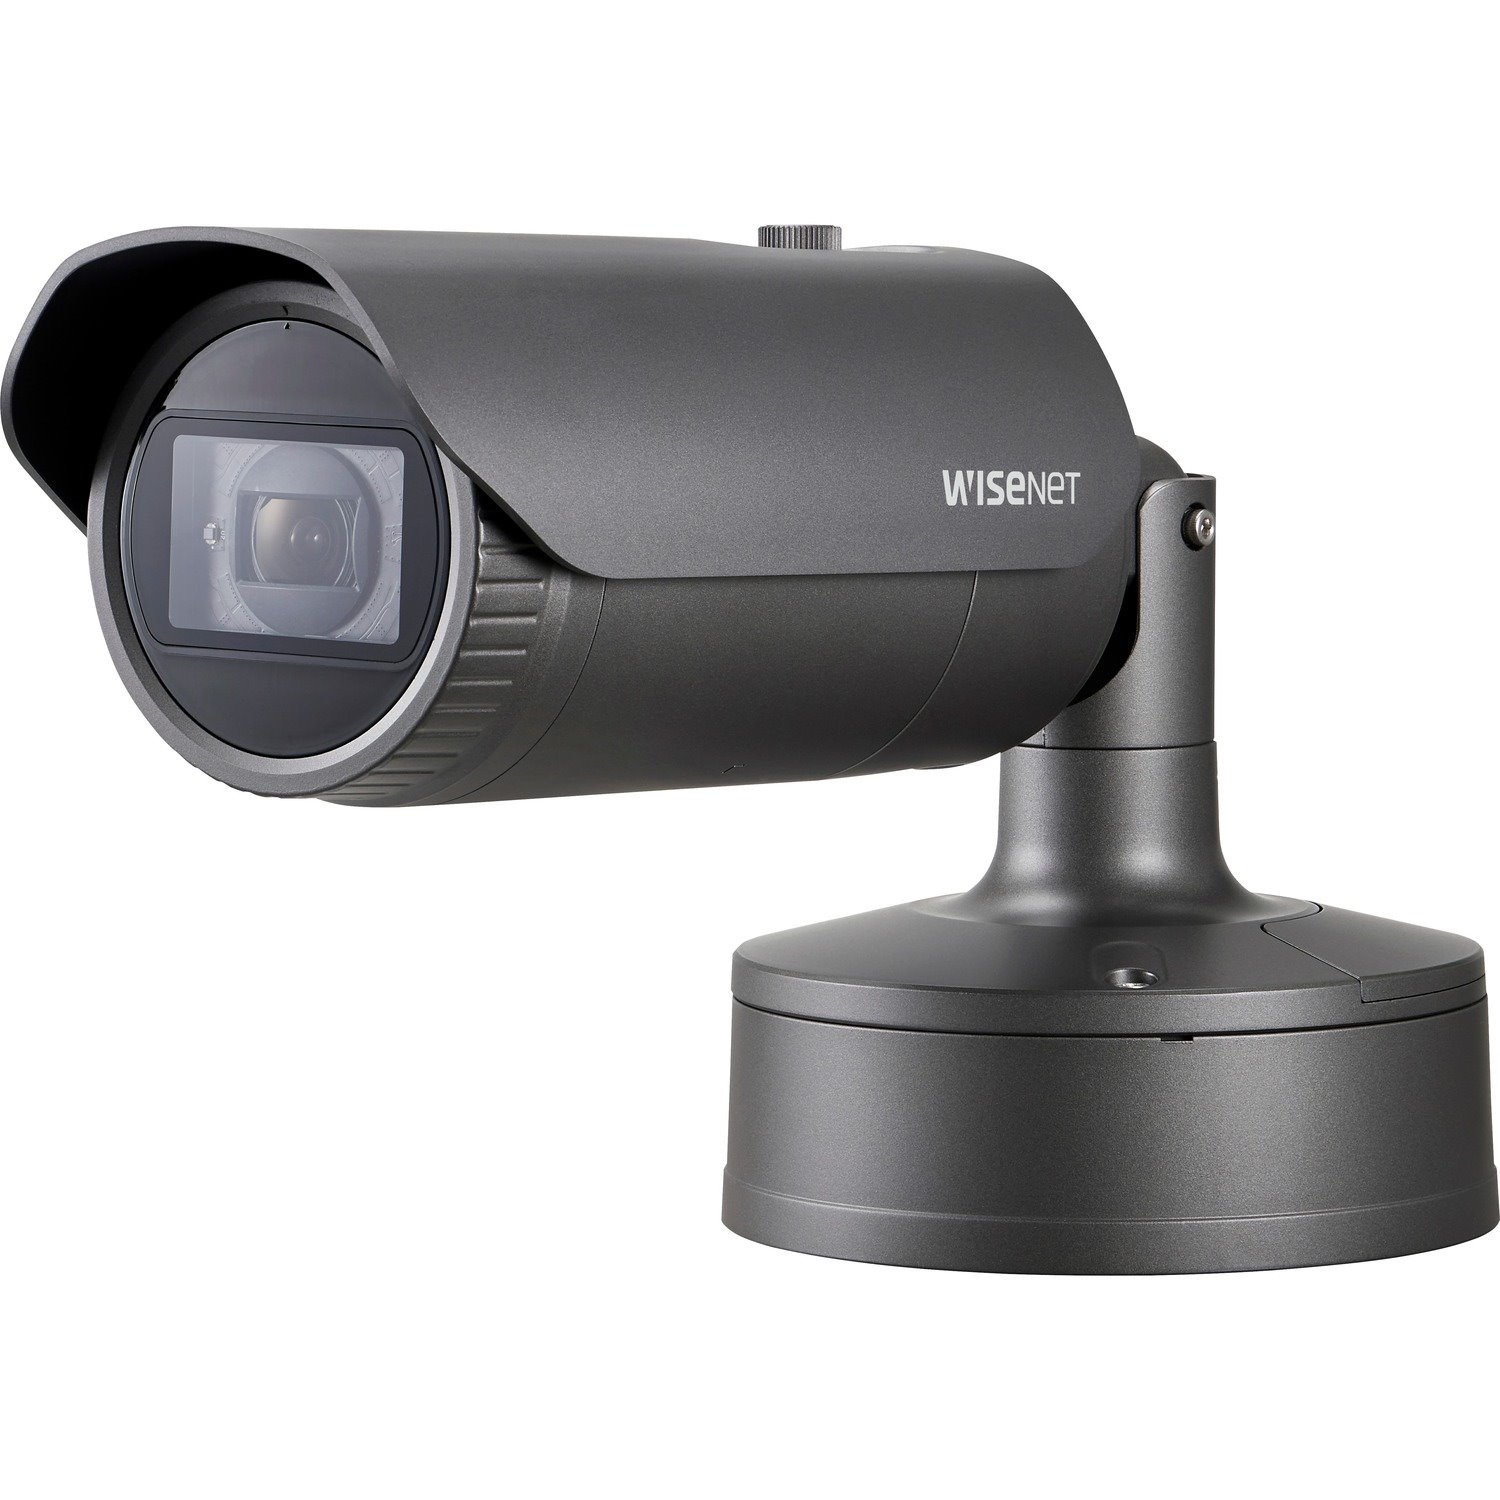 Wisenet XNO-6080R 2 Megapixel Outdoor Full HD Network Camera - Monochrome, Color - Bullet